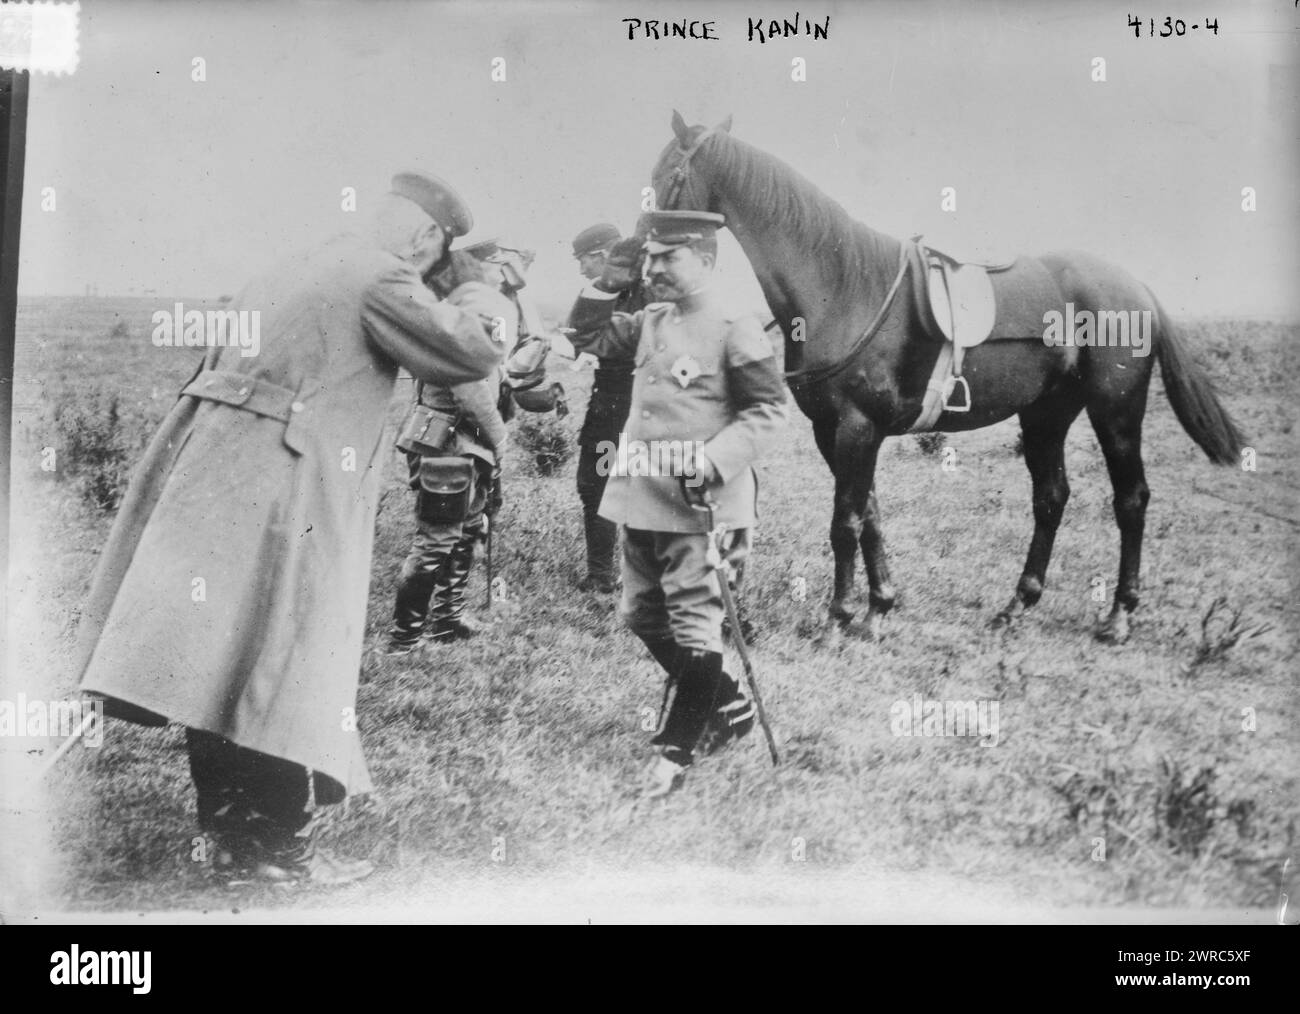 Prince Kanin, Photograph shows Prince Kan'in Kotohito (1865-1945) who served in the Imperial Japanese Army with a horse and other men., between ca. 1915 and ca. 1920, Glass negatives, 1 negative: glass Stock Photo